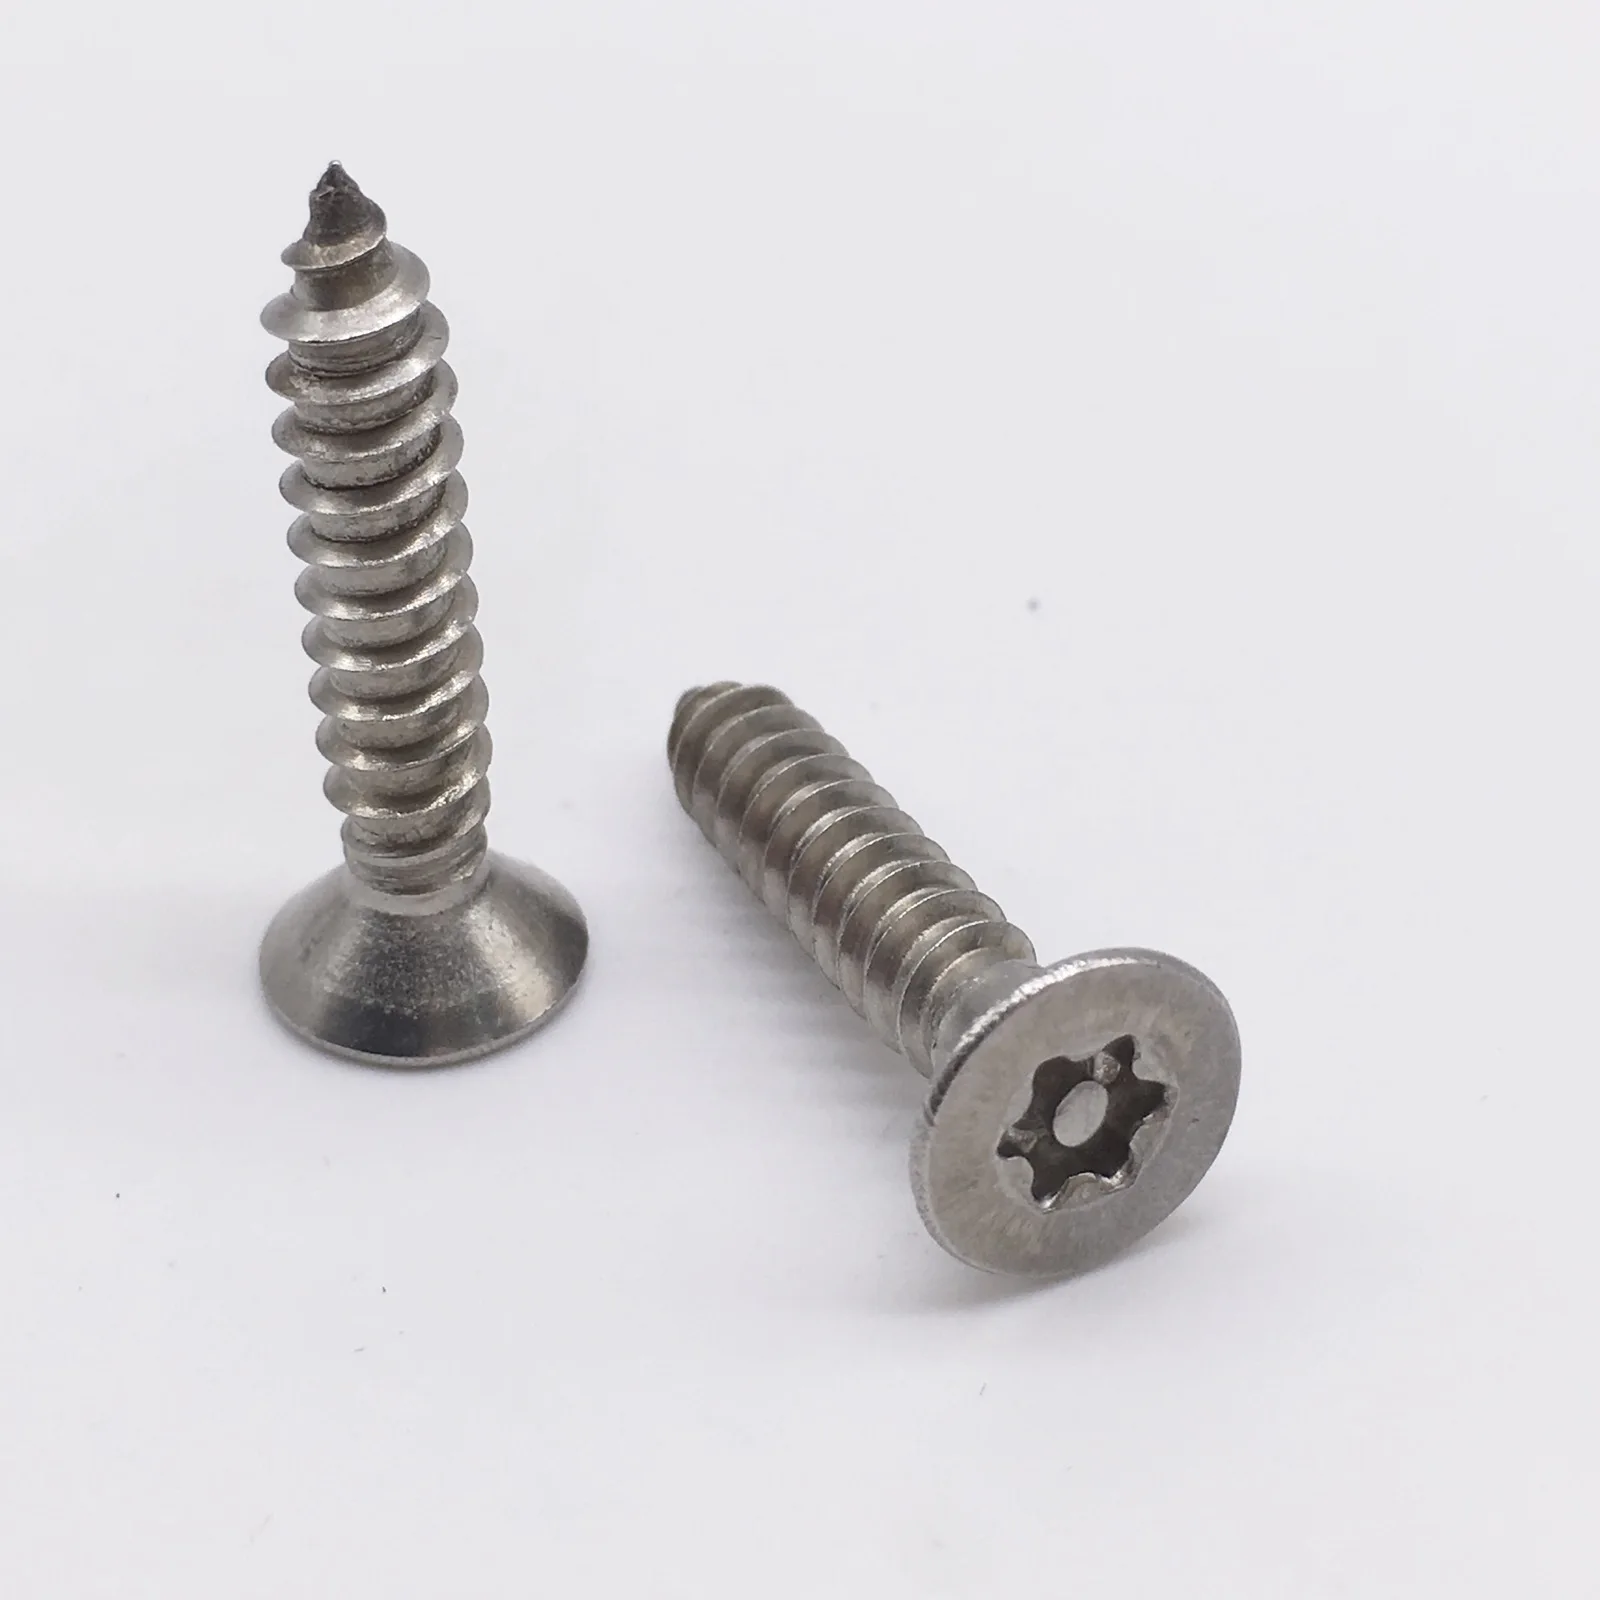 25 @ 4 x 25 mm STAINLESS STEEL TORX SELF TAPPING SCREW COUNTERSUNK CSK T20 BIT 